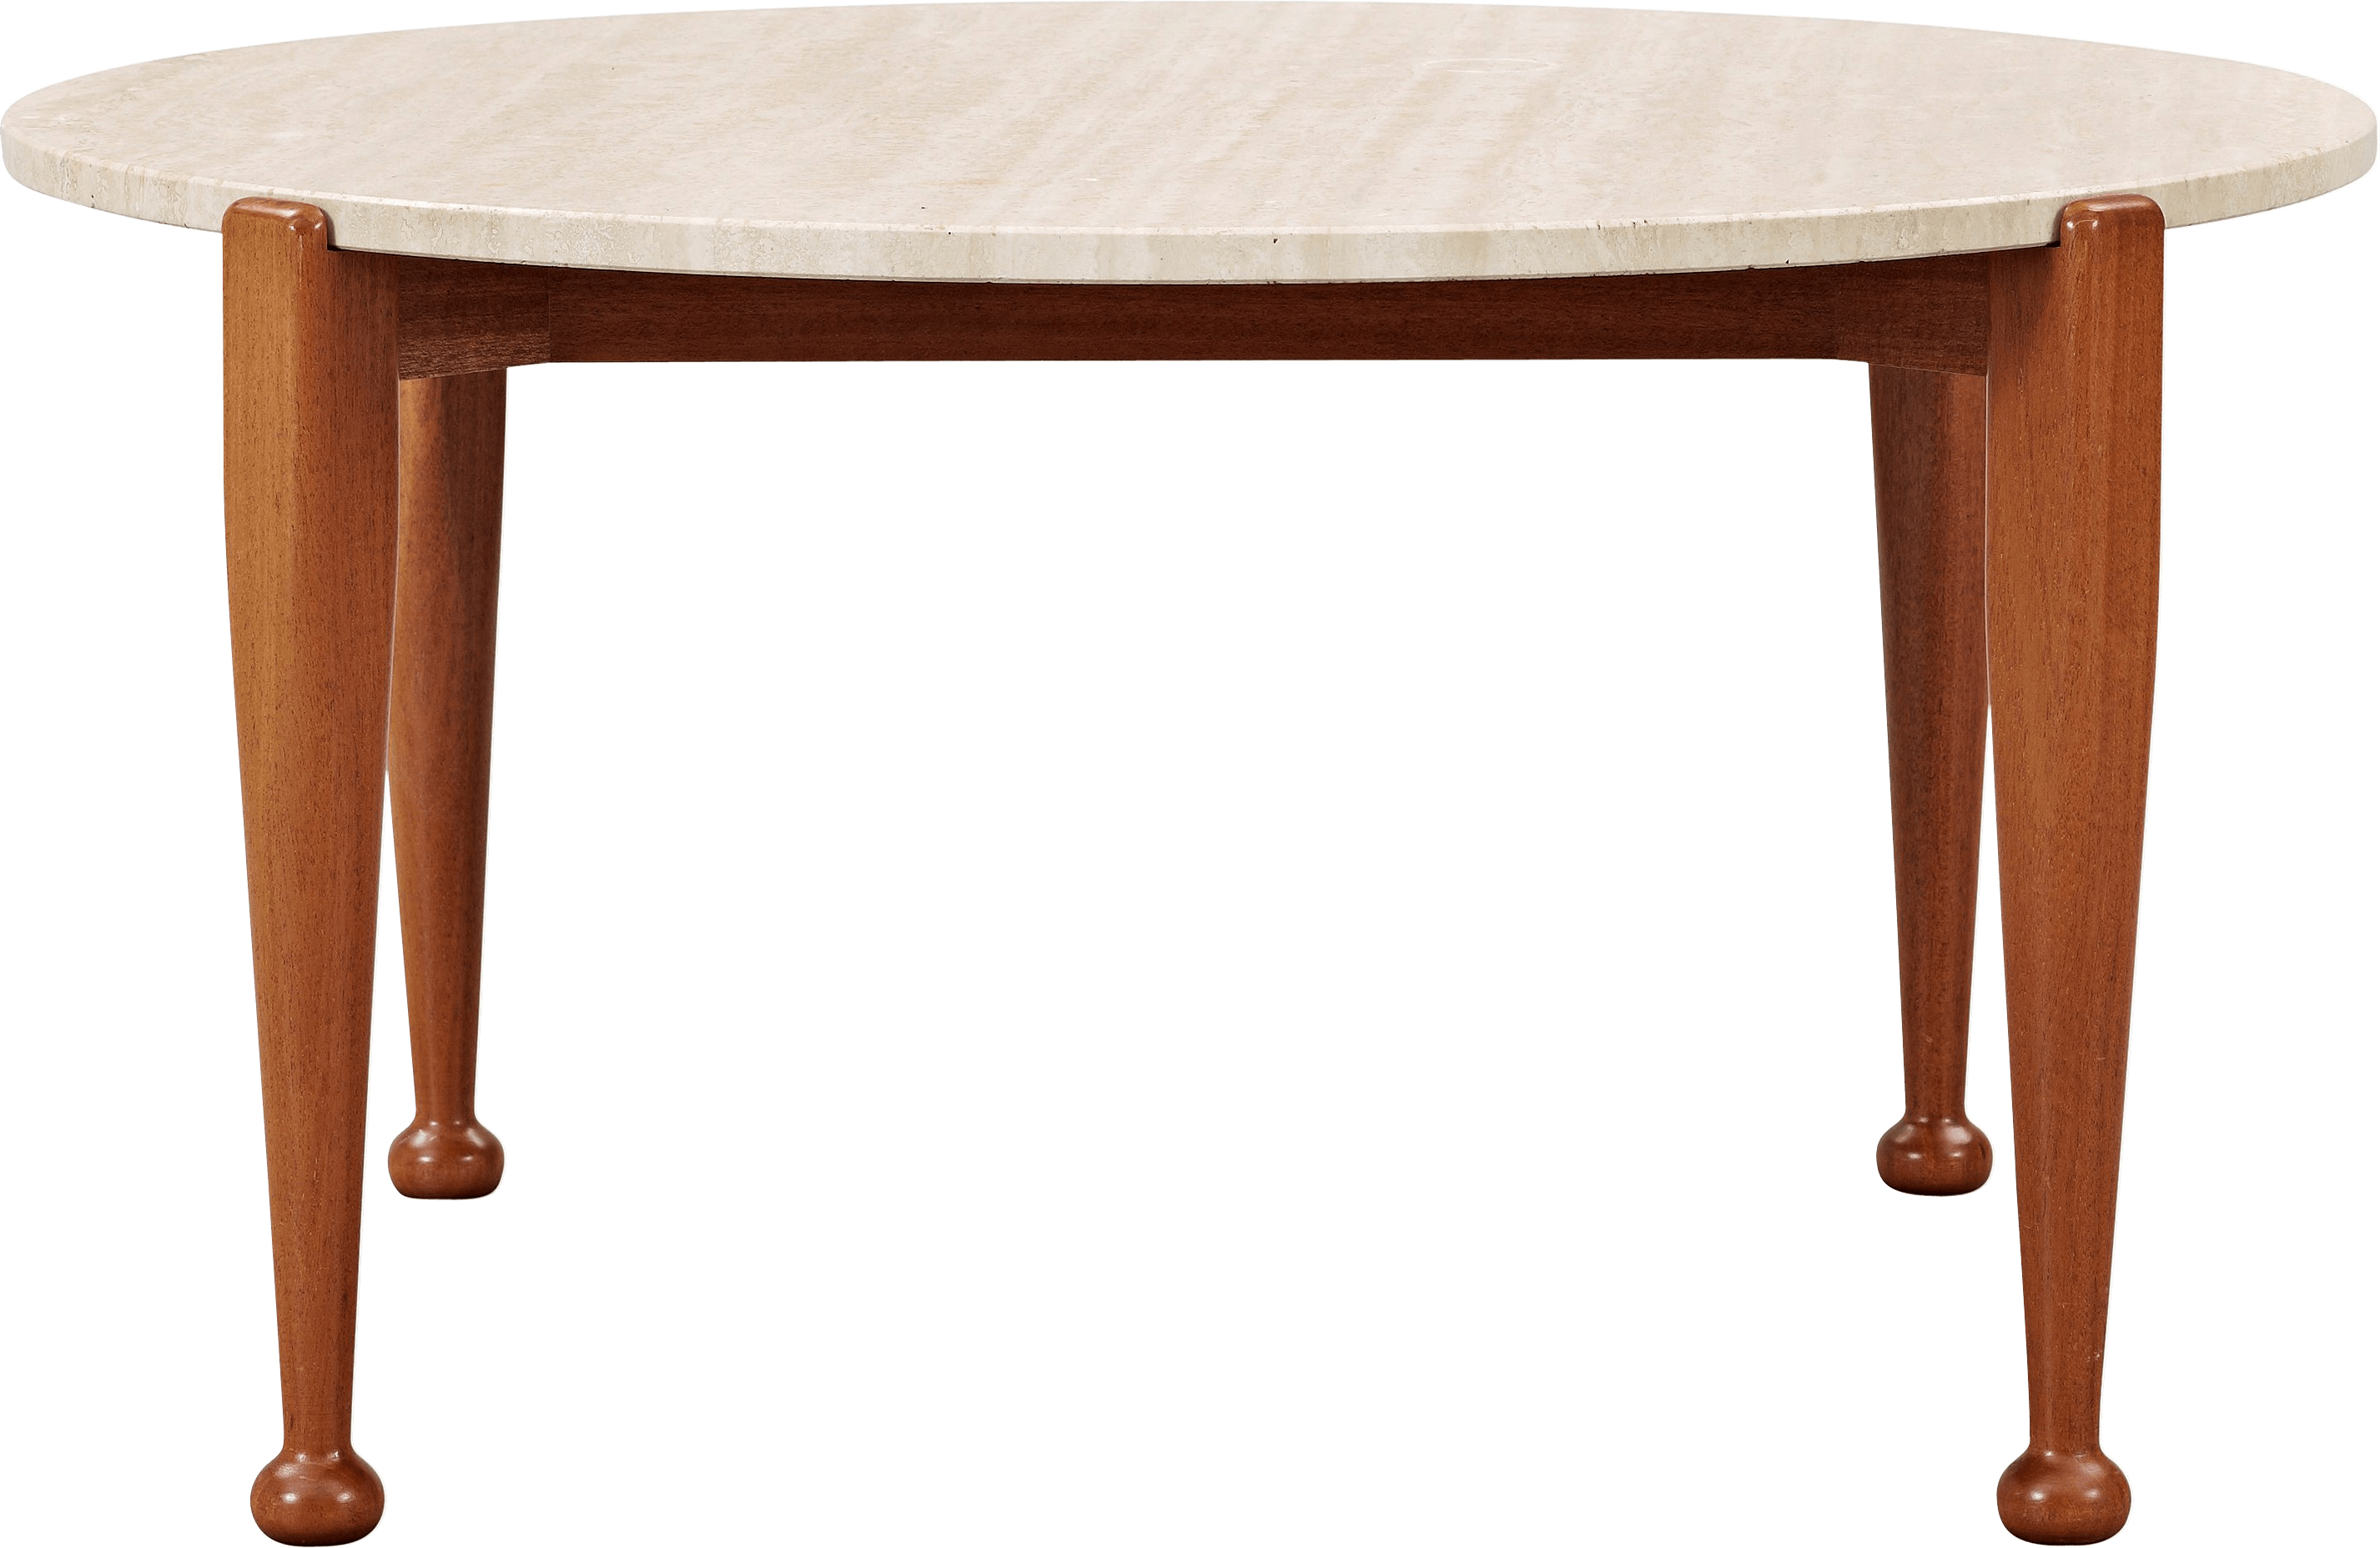 Download Wooden Table Png Image Hq Png Image | Freepngimg Throughout Transparent Side Tables For Living Rooms (View 17 of 20)